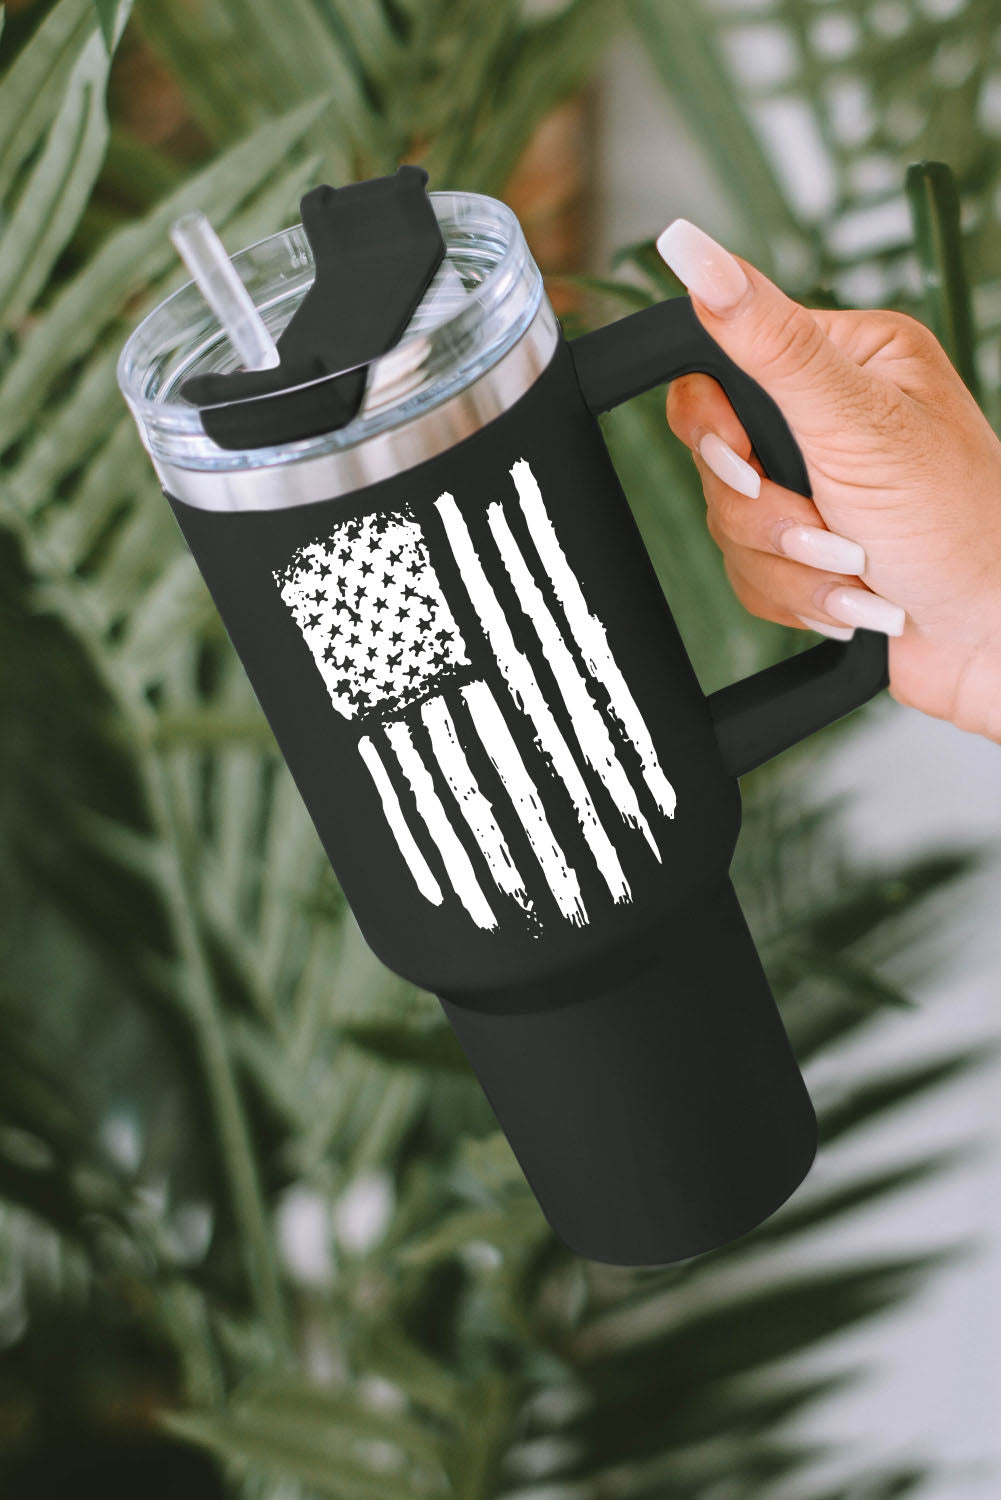 American Flag Print Stainless Steel Portable Cup with Handle 40oz